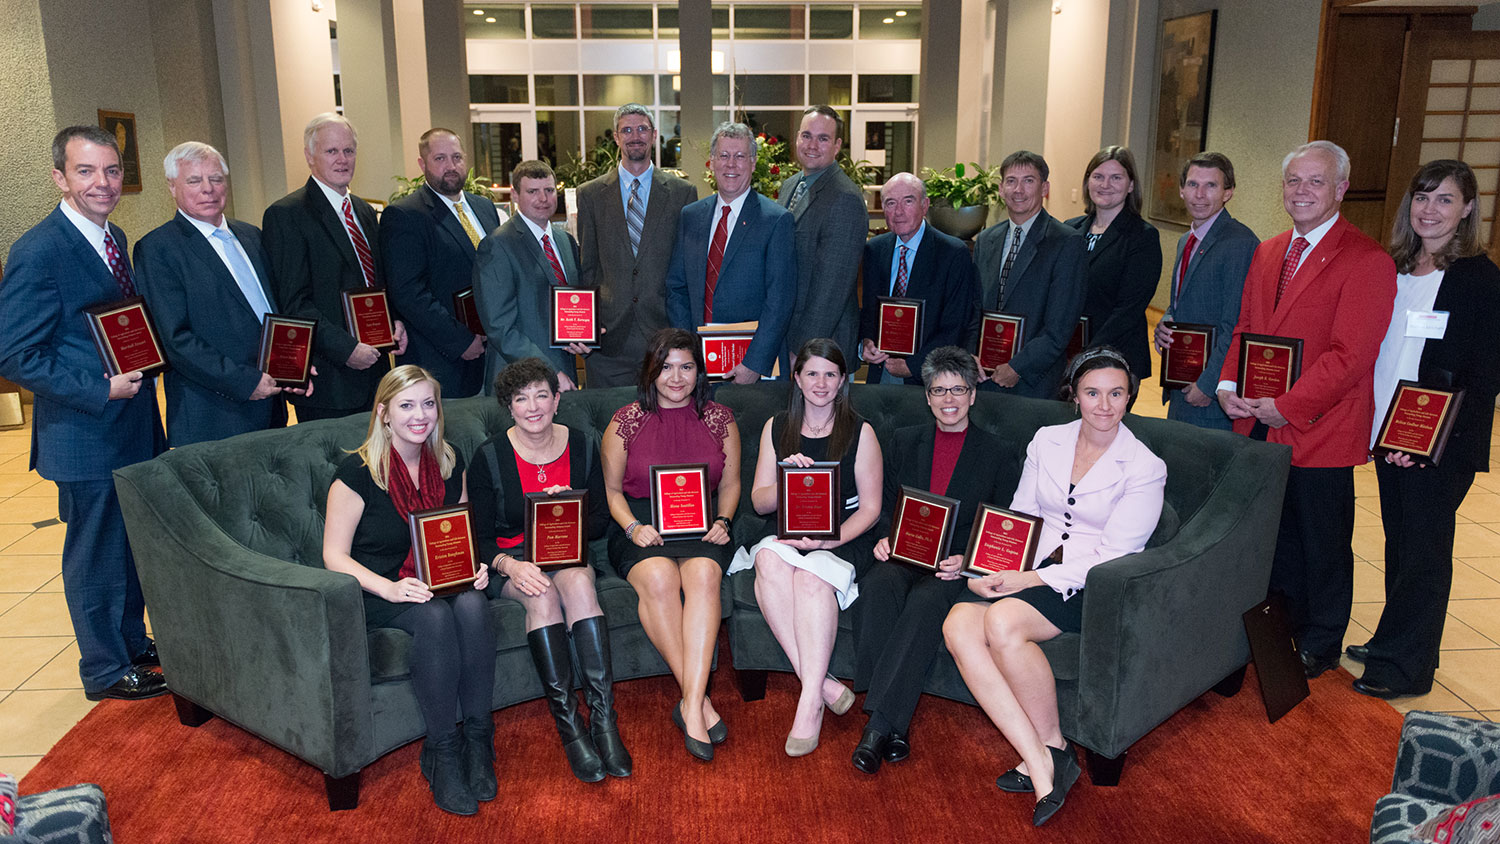 Winners of the CALS distinguished and outstanding alumni awards